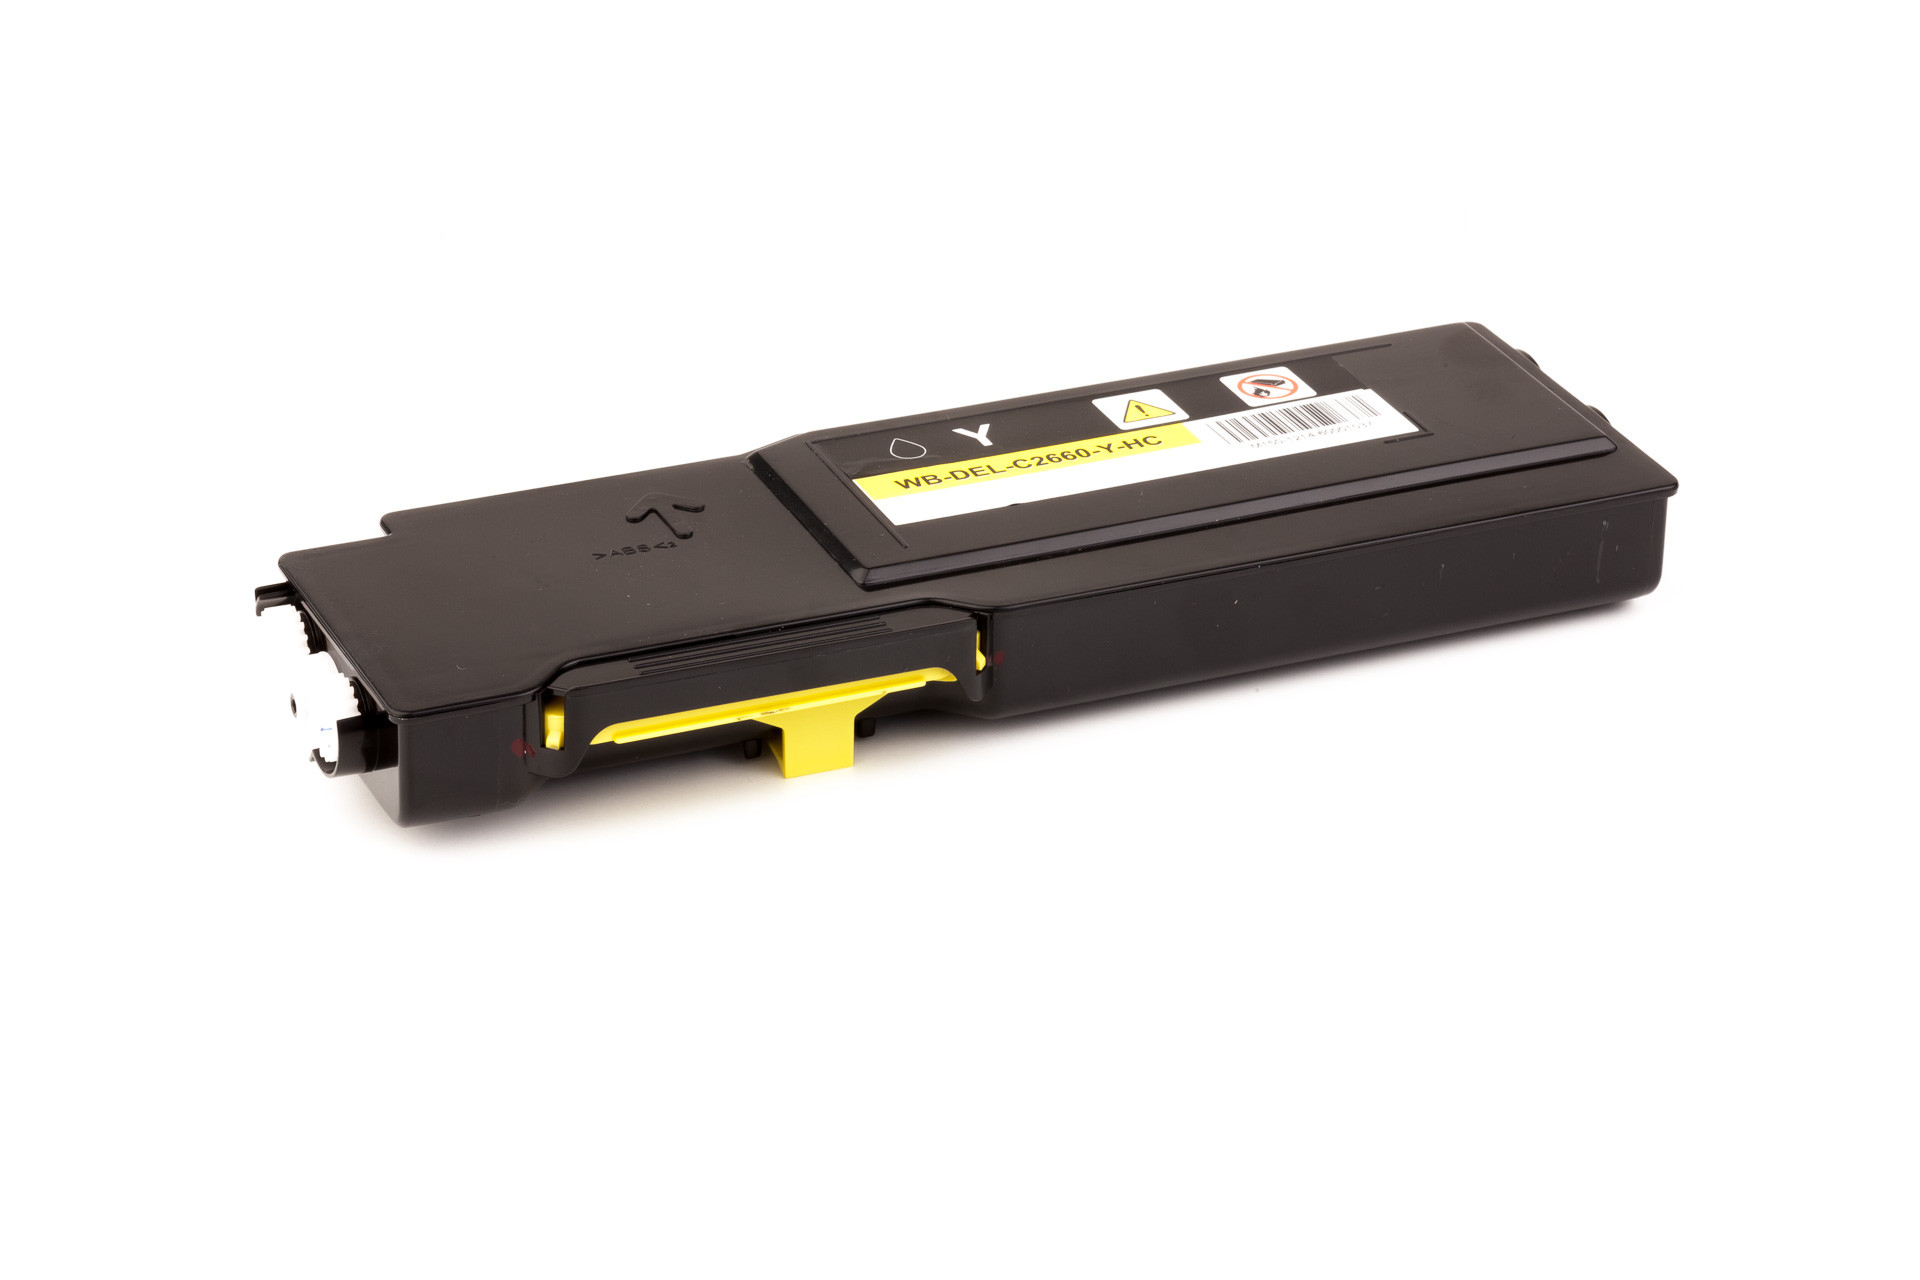 Set consisting of Toner cartridge (alternative) compatible with Dell C 2660 DN / Dell C 2665 DNF - 593-BBBQ / 593BBBQ / Y5CW4 - black, 593-BBBT / 593BBBT / 488NH - cyan, 593-BBBS / 593BBBS / VXCWK - magenta, 593-BBBR / 593BBBR / YR3W3 - yellow - Save 6%